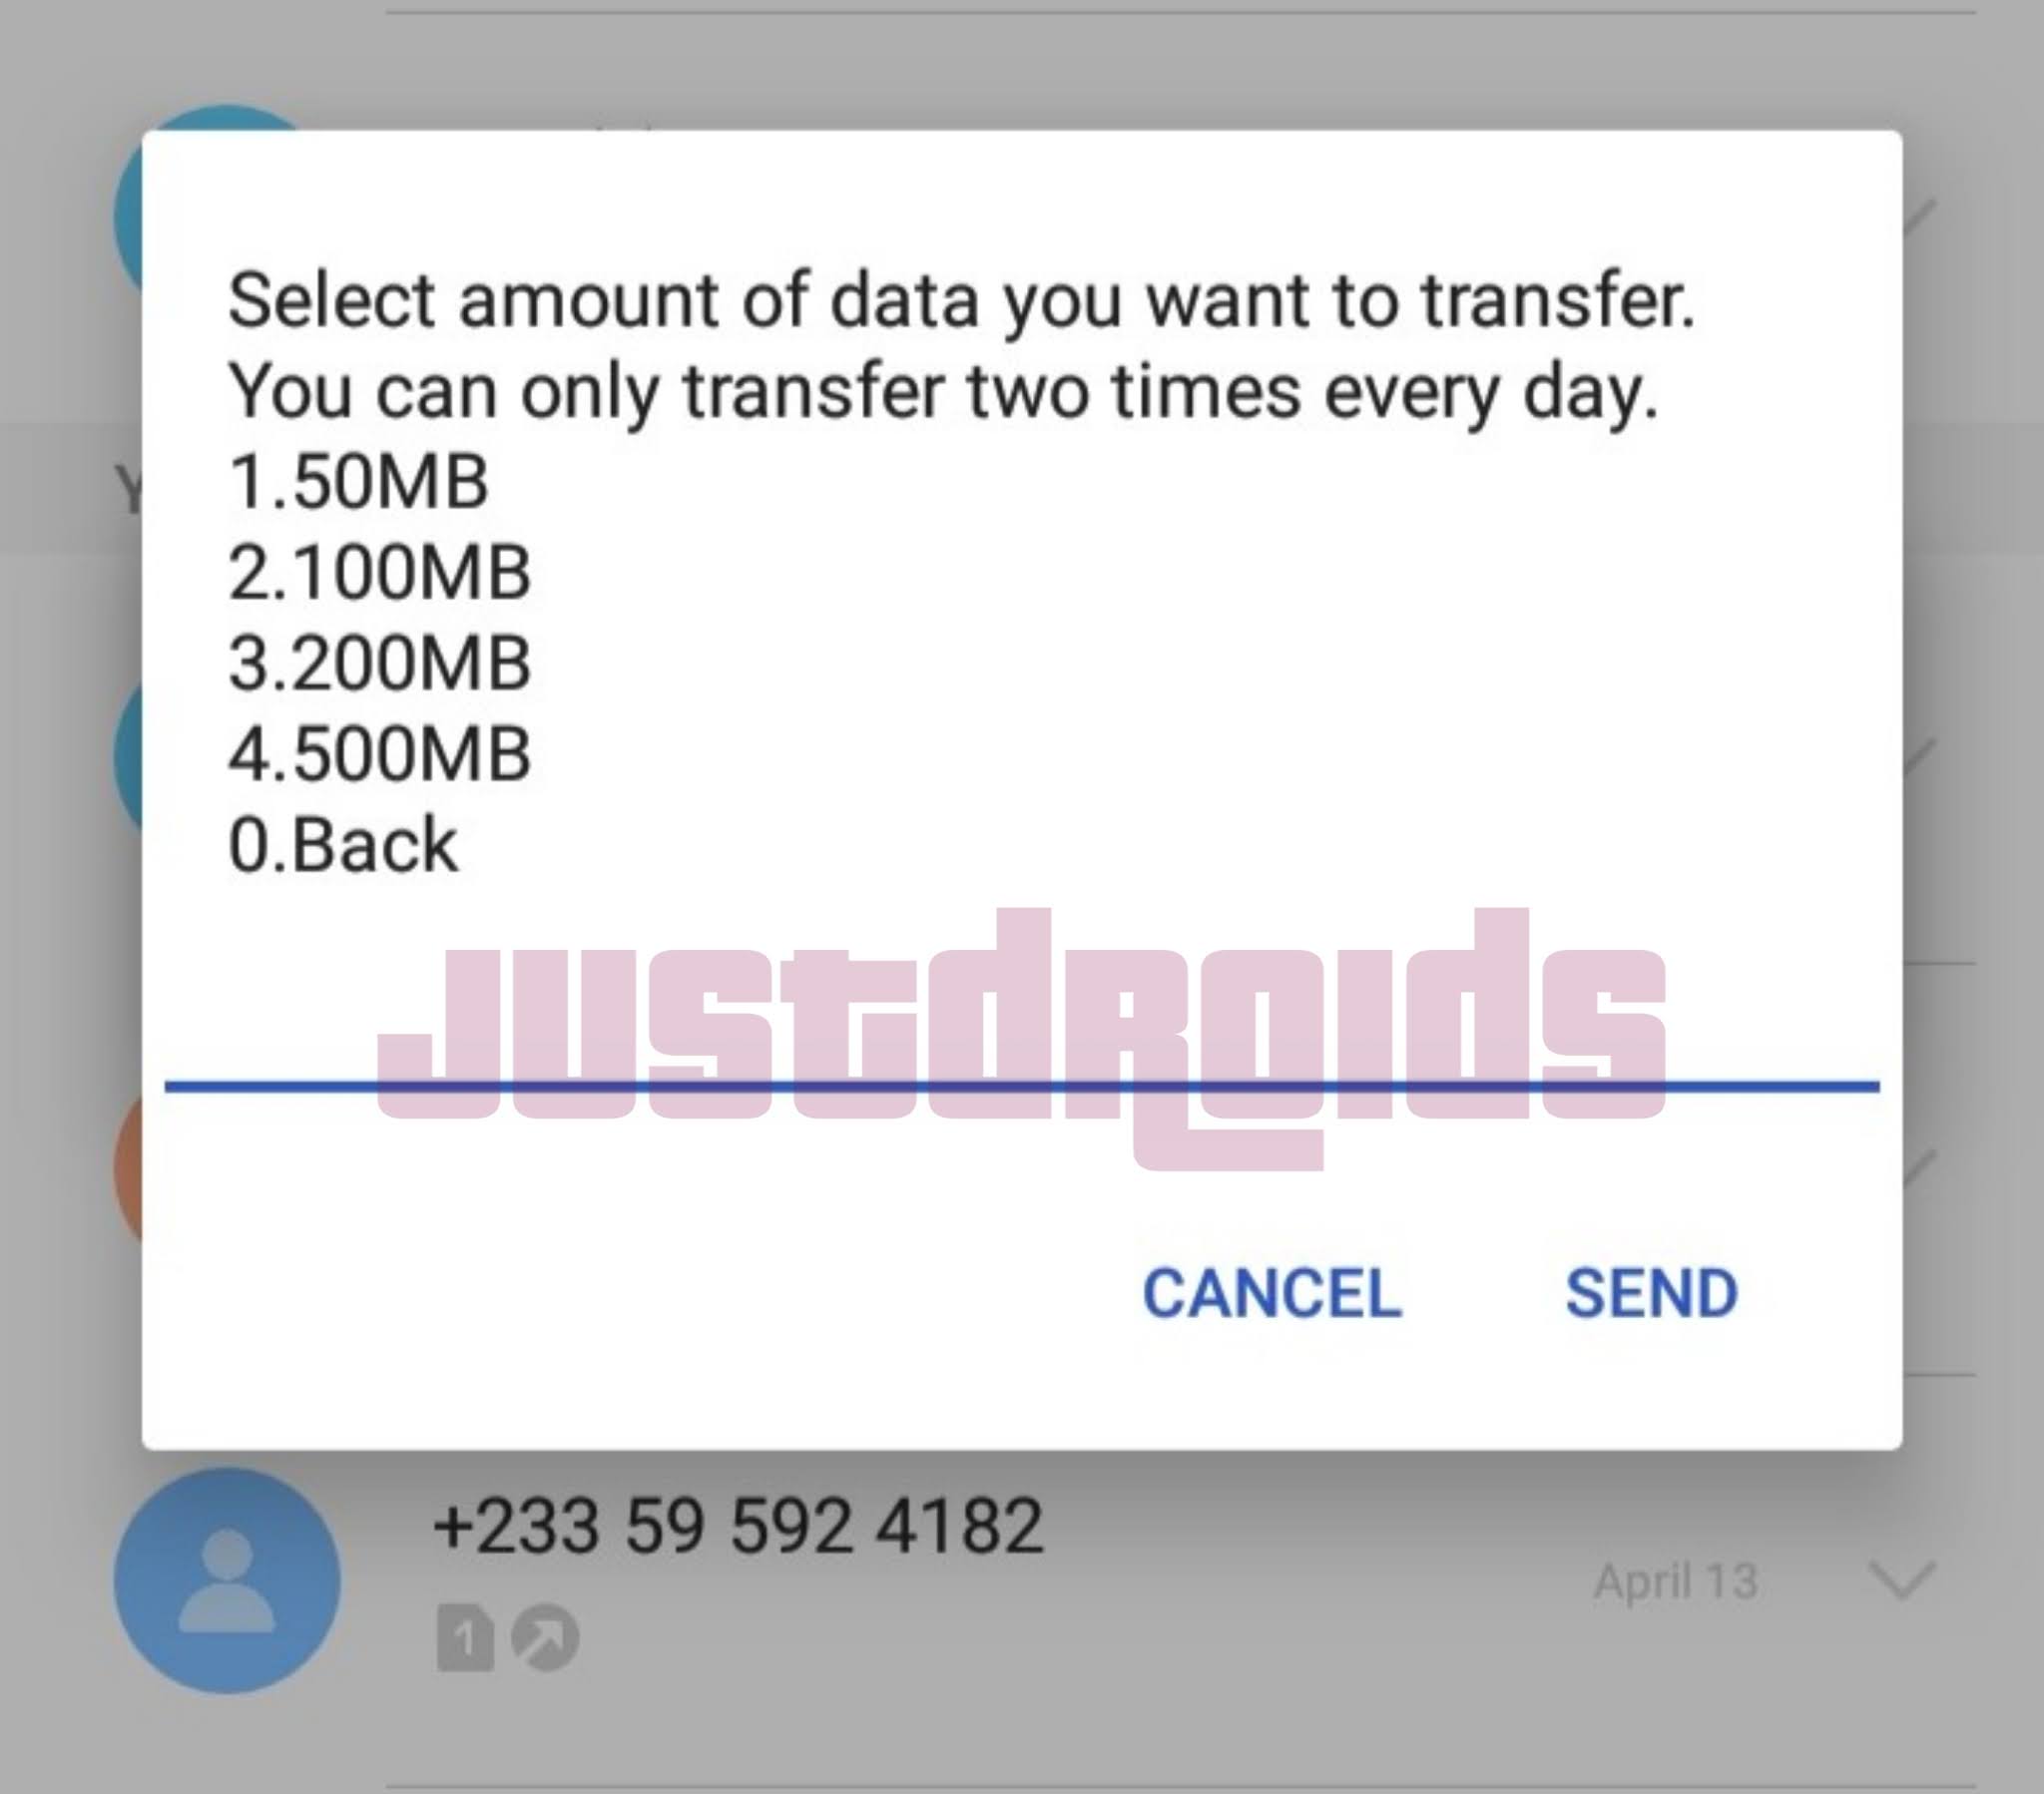 How to transfer/share data on Mtn to a friend's line